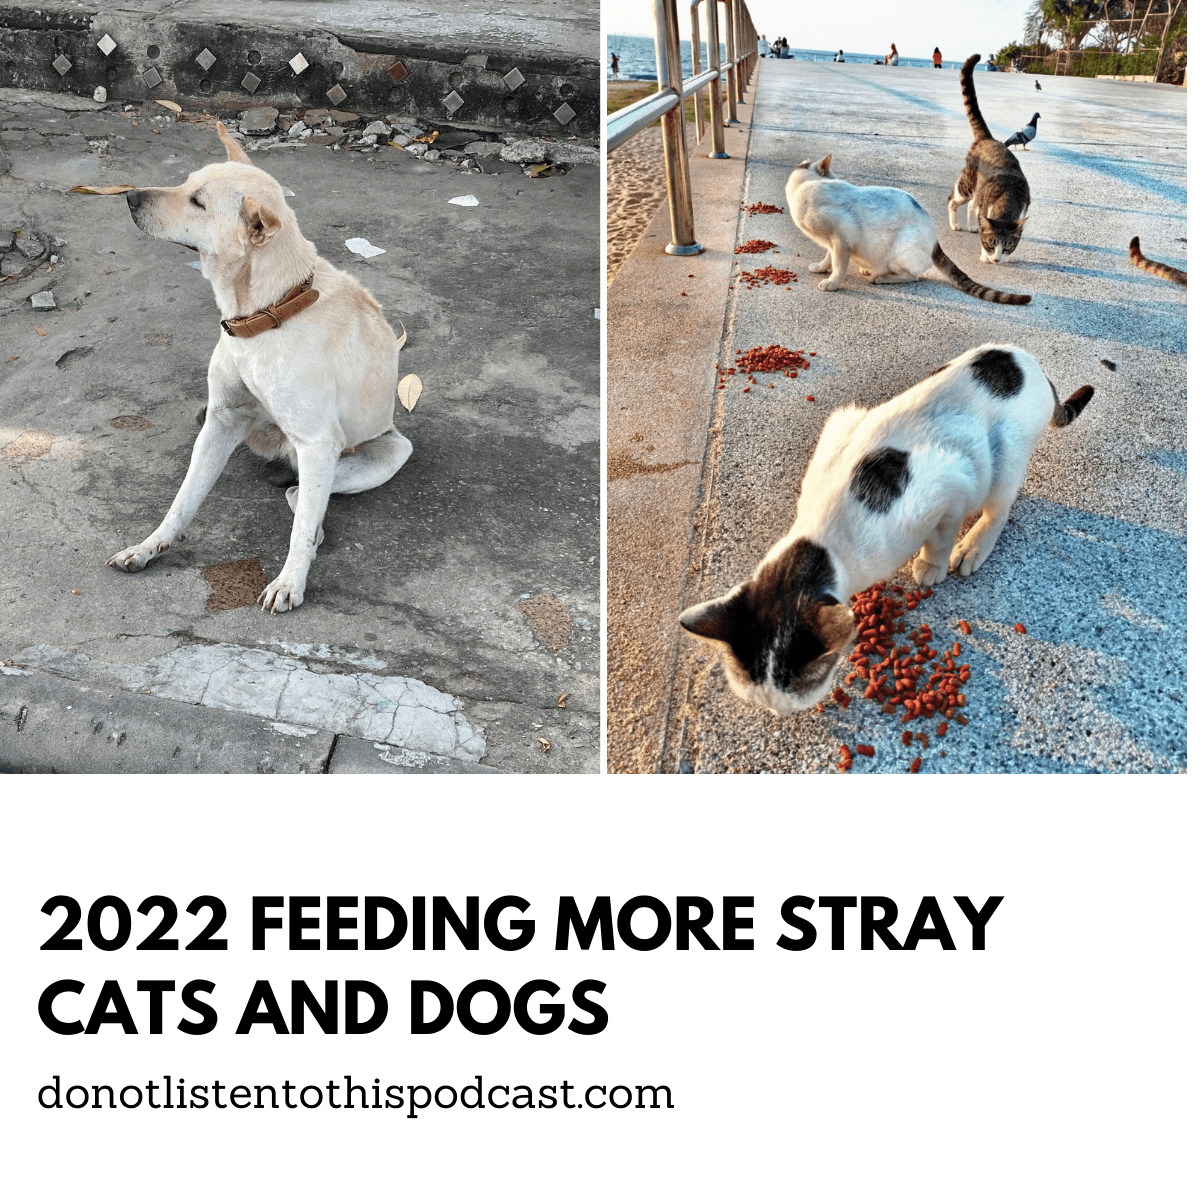 Feeding More Stray Cats & Dogs in 2022